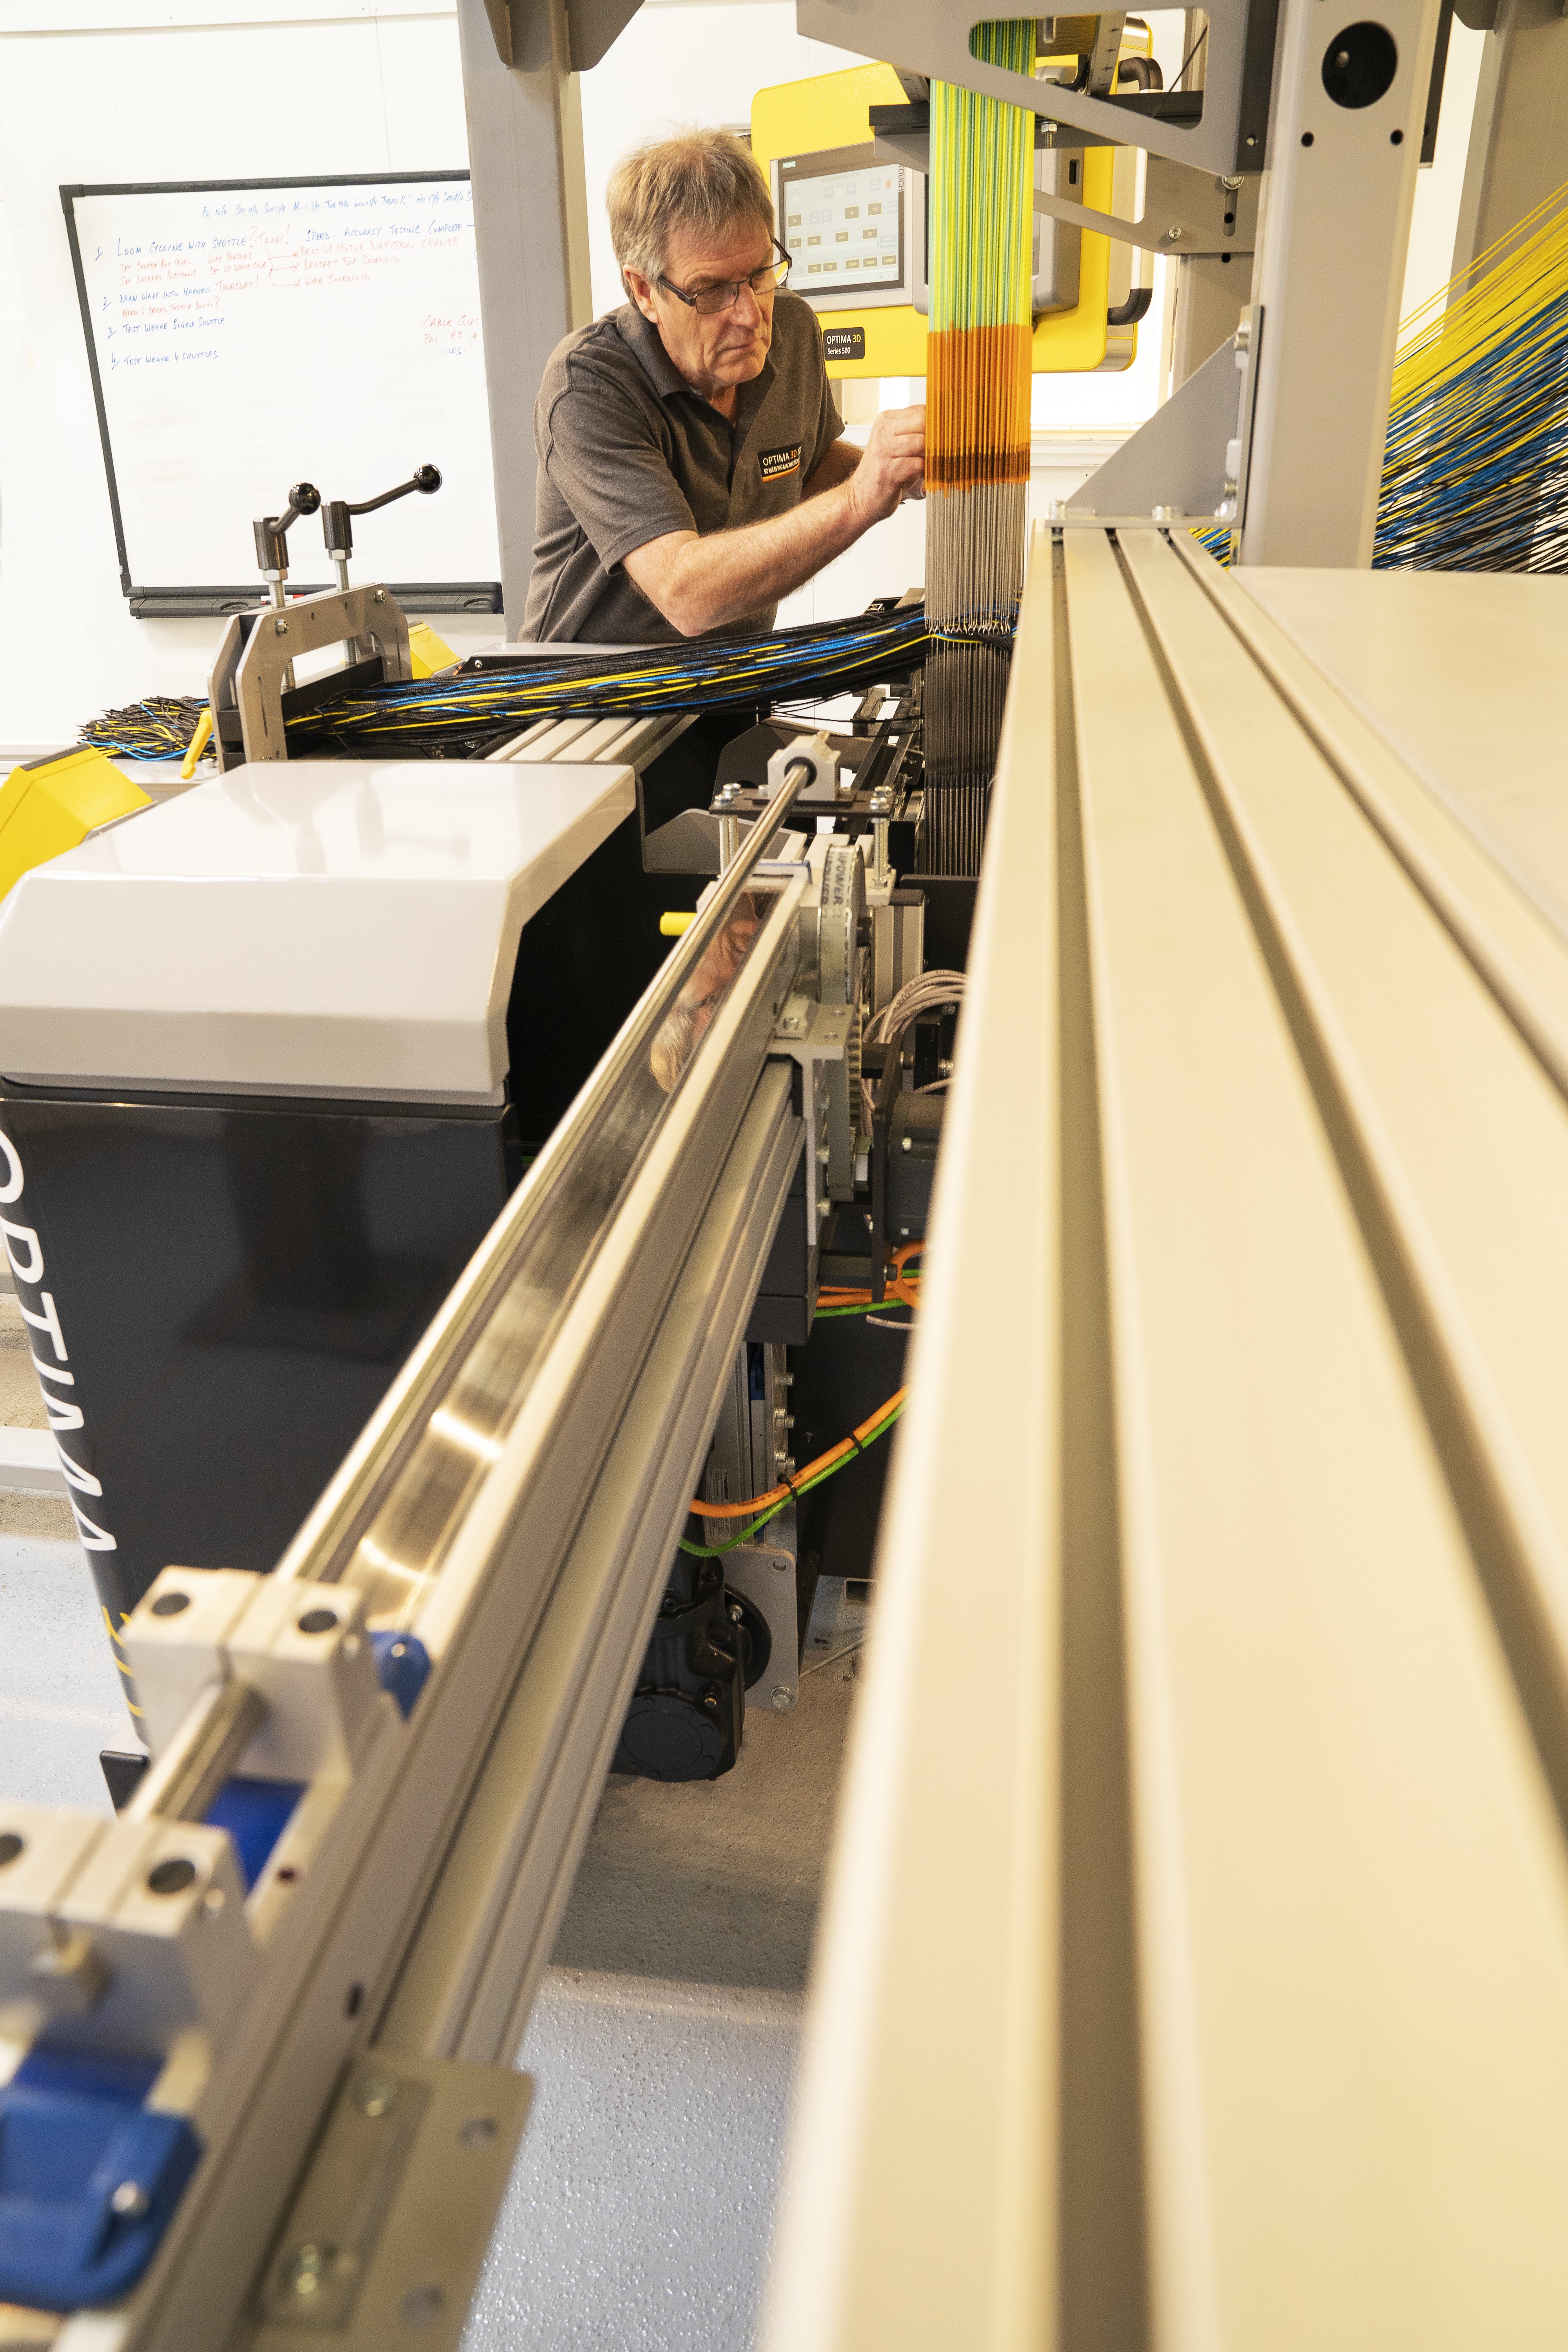 The machines can produce woven net shapes, billets and para beams for composite applications.